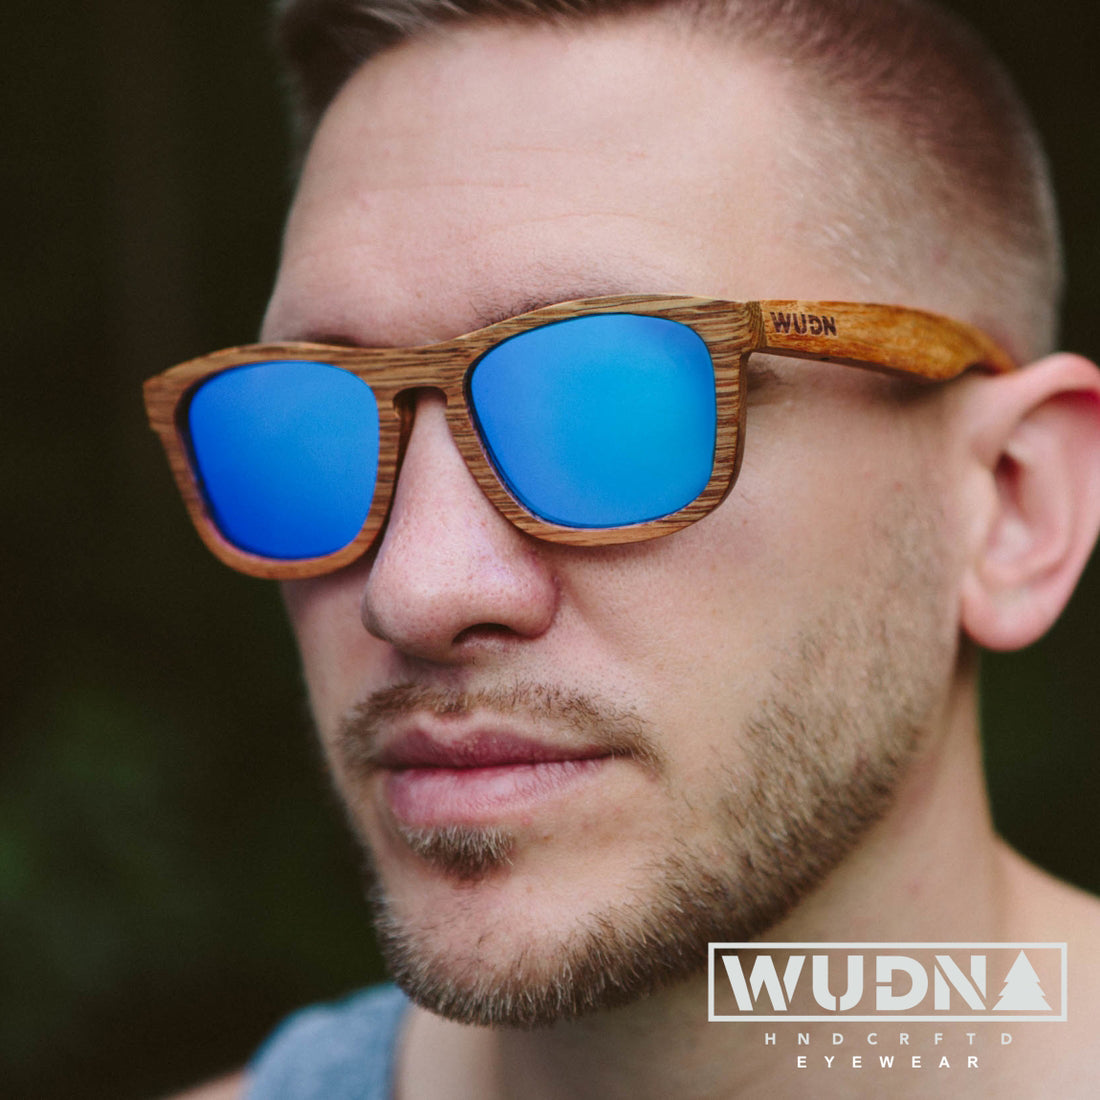 Man wearing all wood sunglasses with blue mirrored lenses